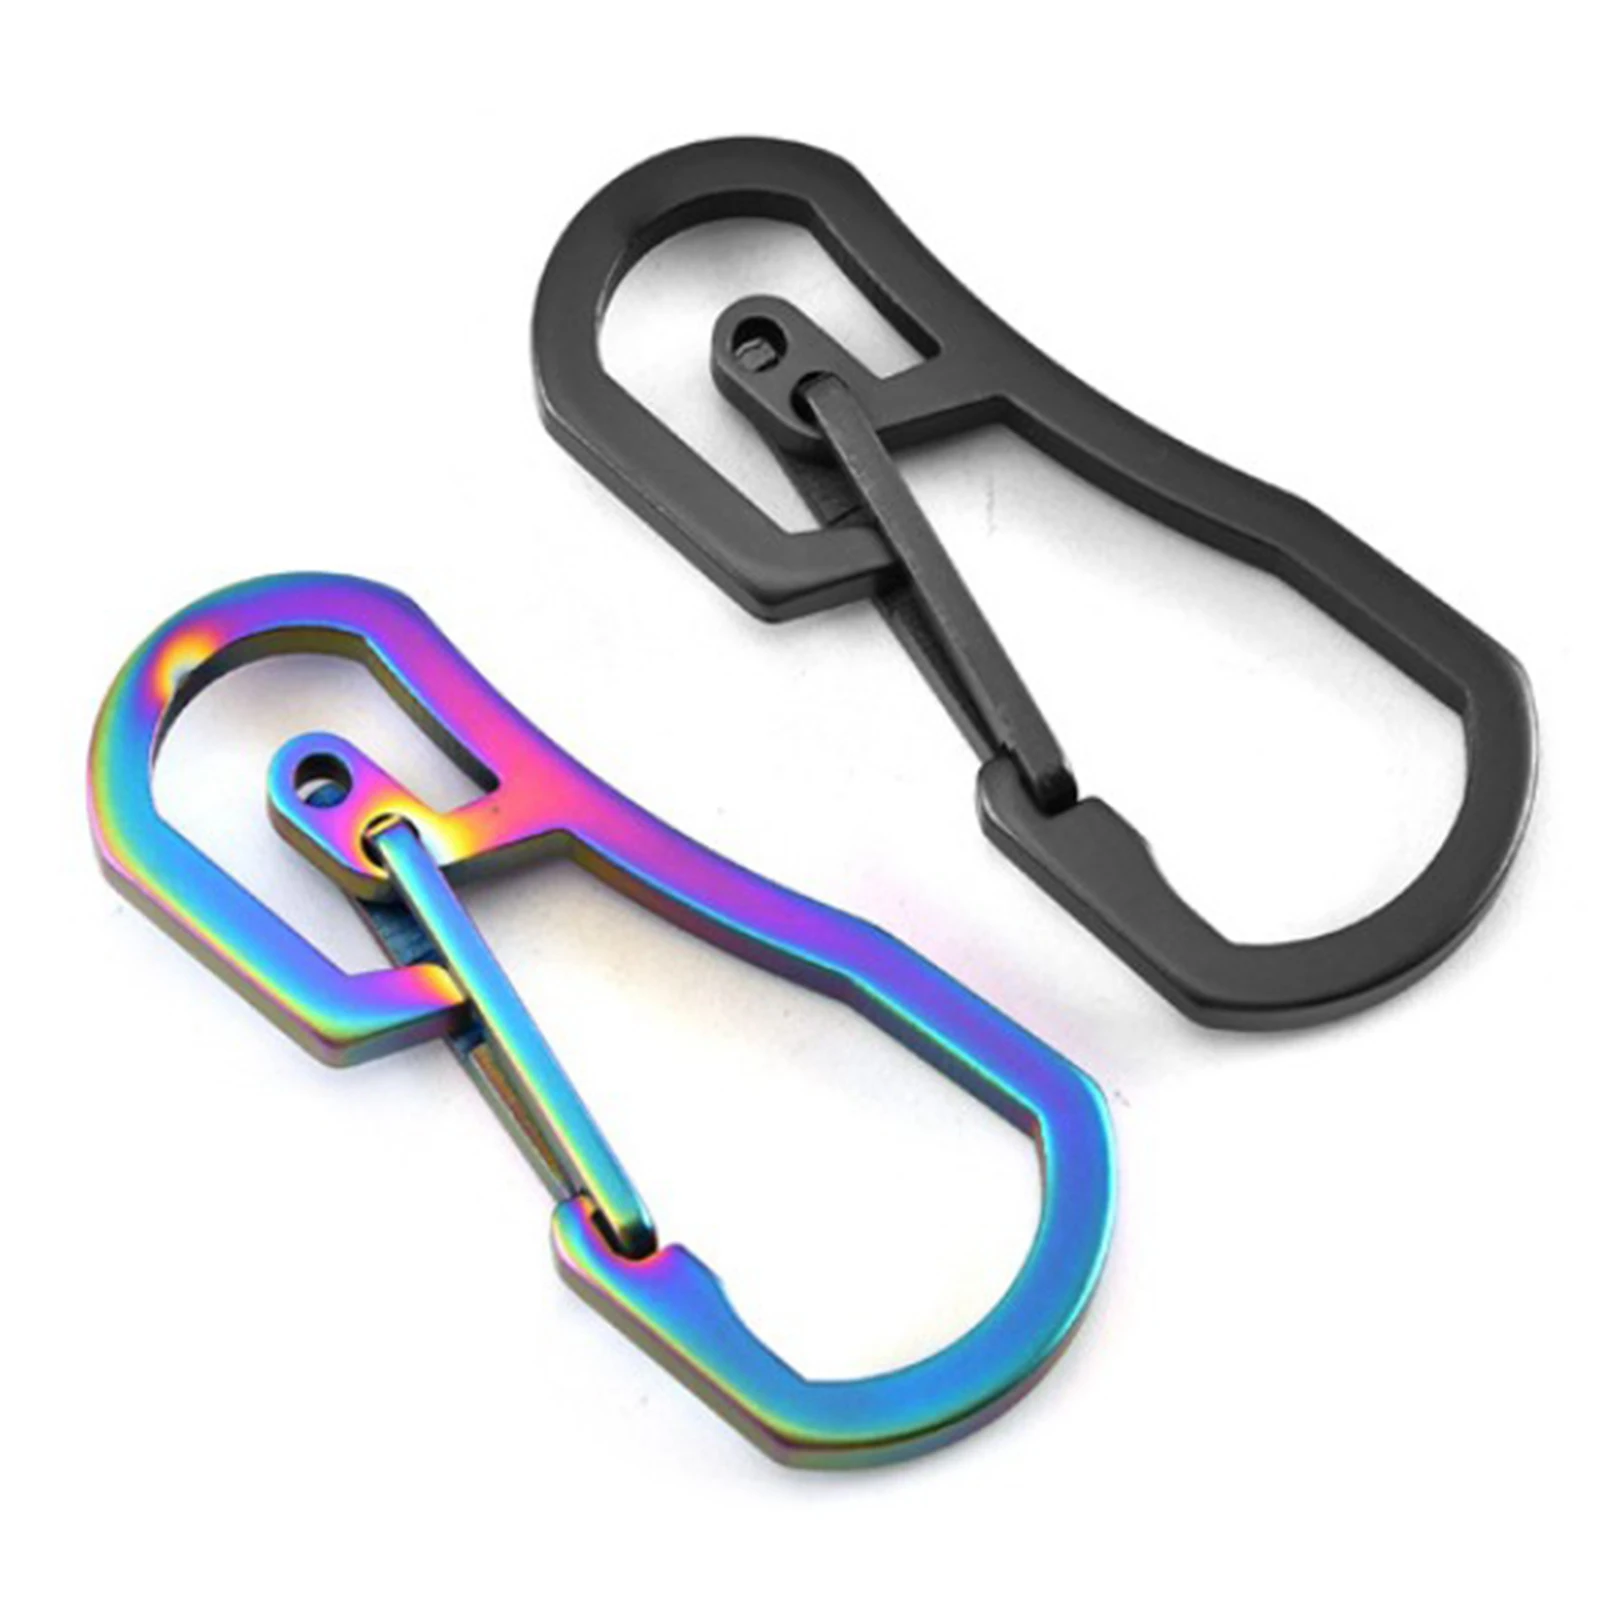 Carabiner Clip Hiking Climbing Hook Buckle With Strap Key Ring Keychain 